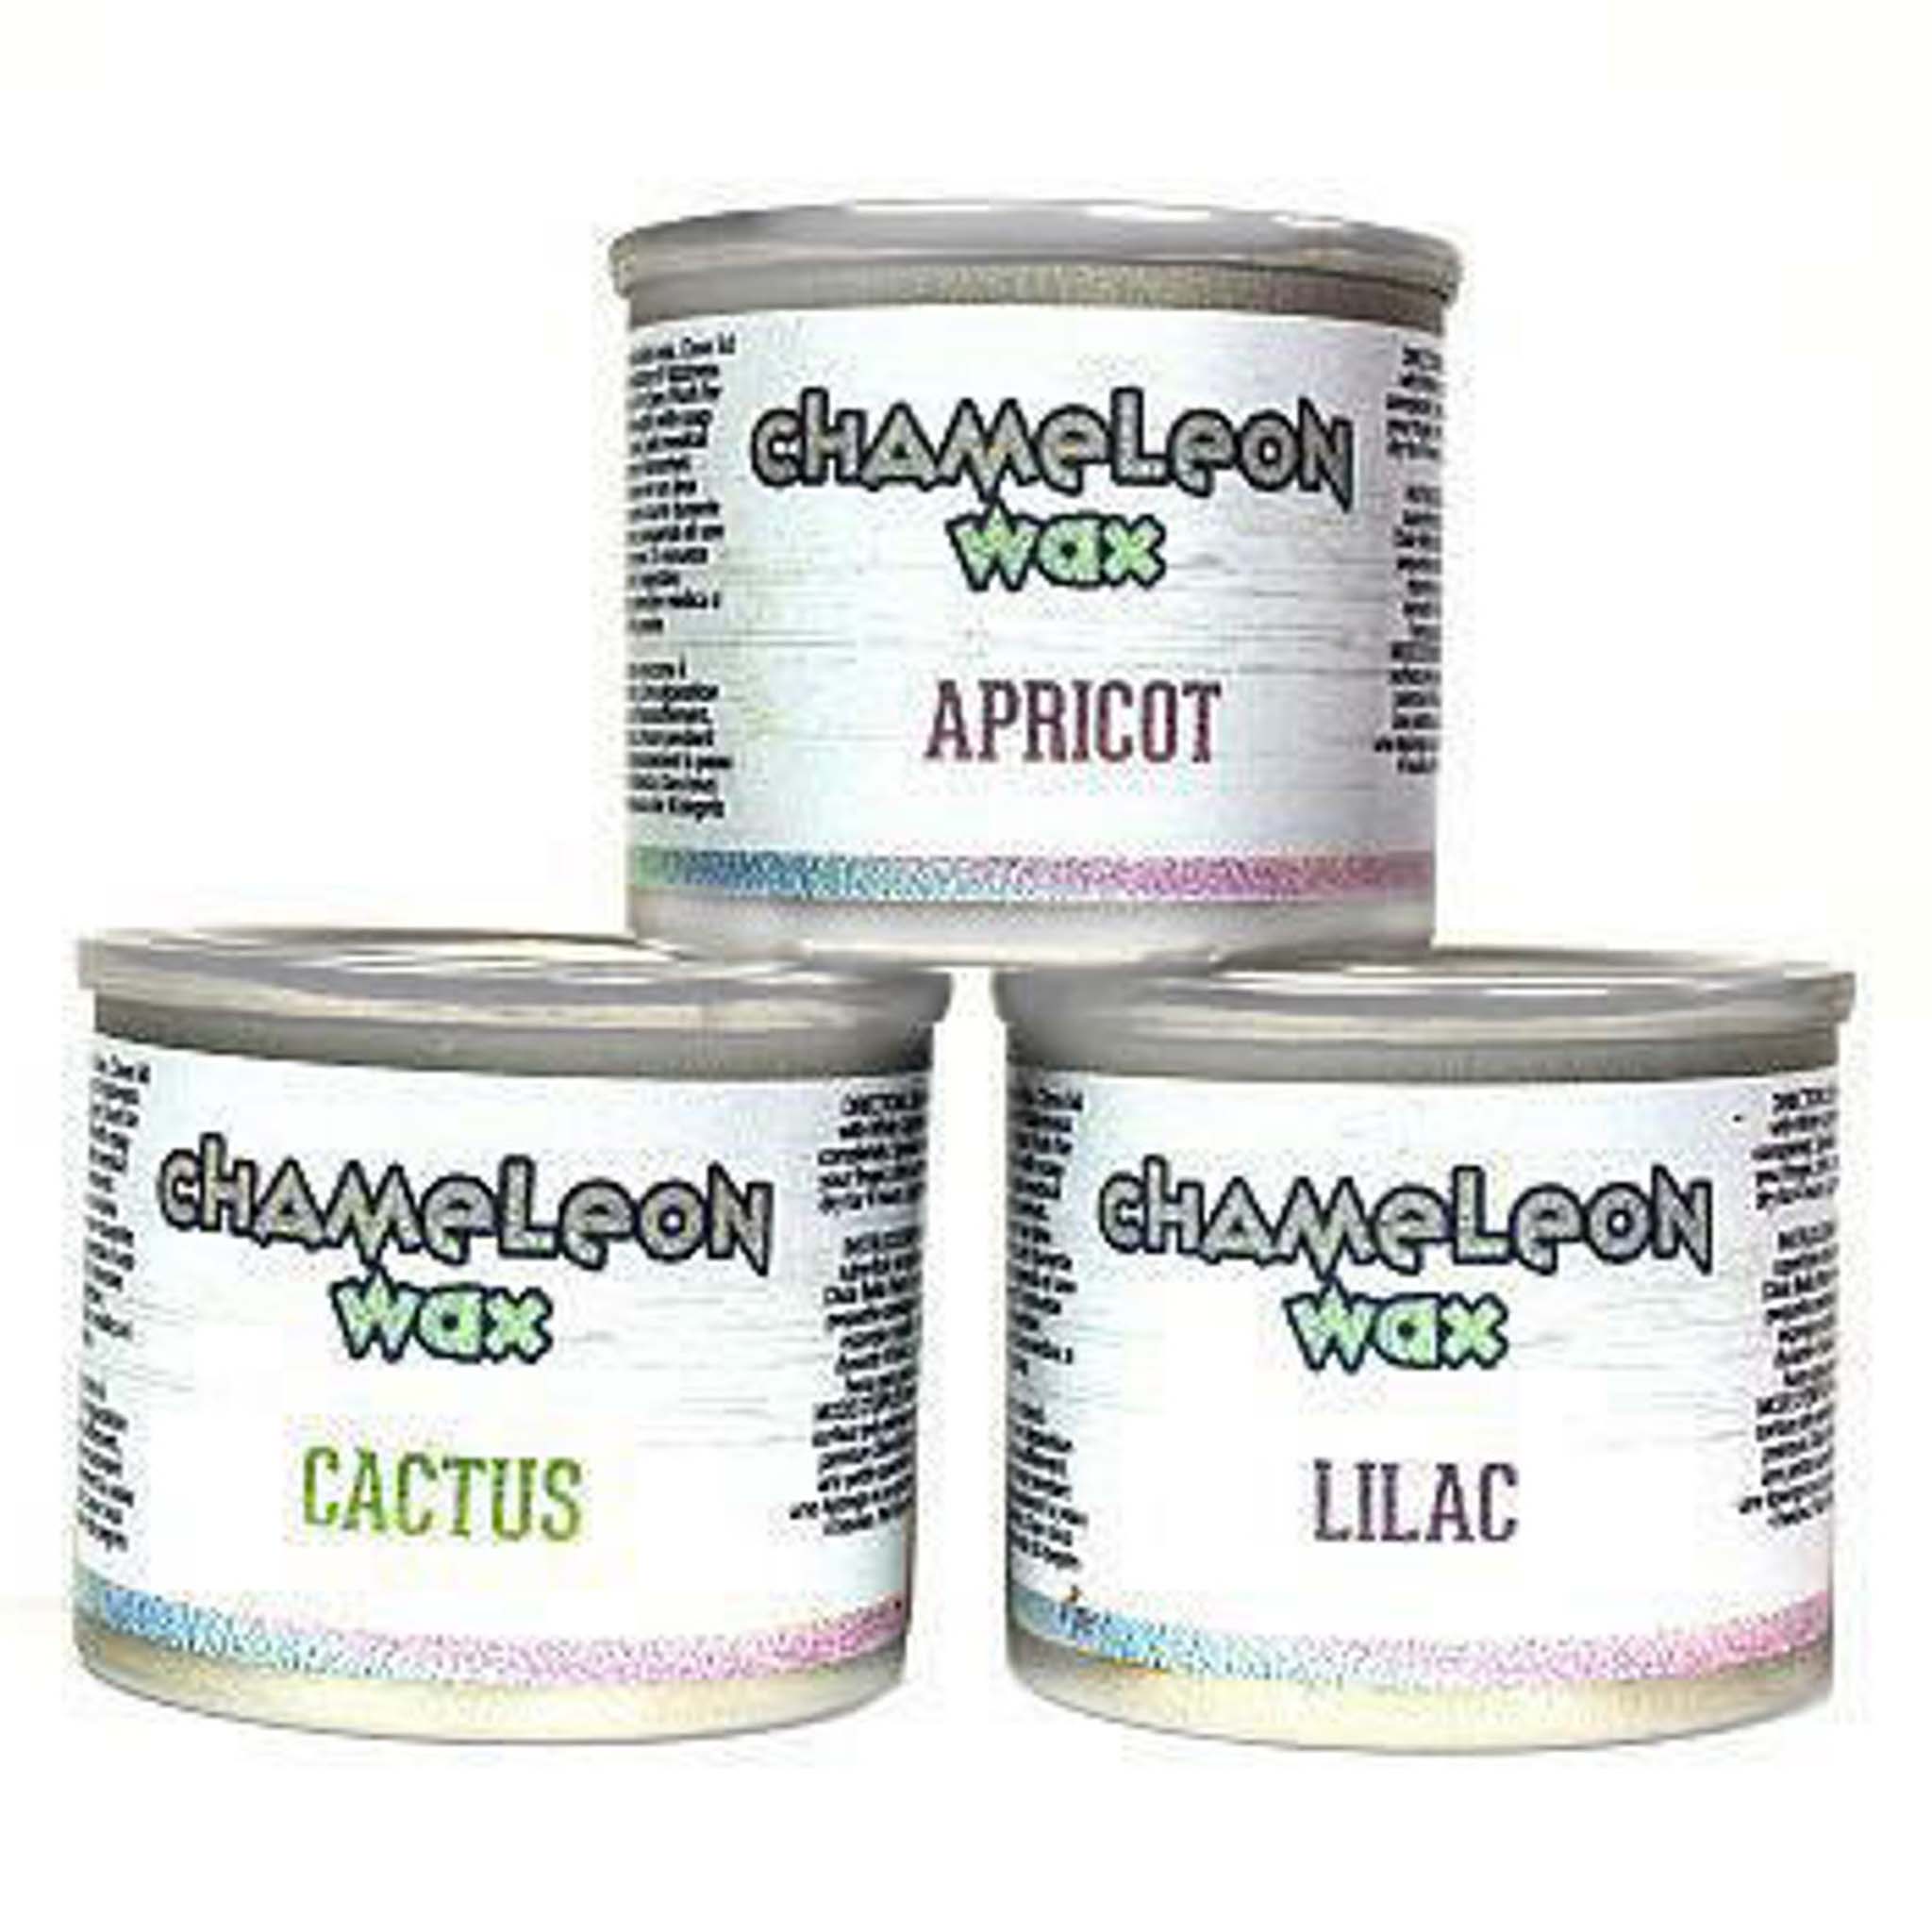 Three 1.3 oz (40ml) containers of Dixie Belle's Chameleon Gilding Wax are against a white background.